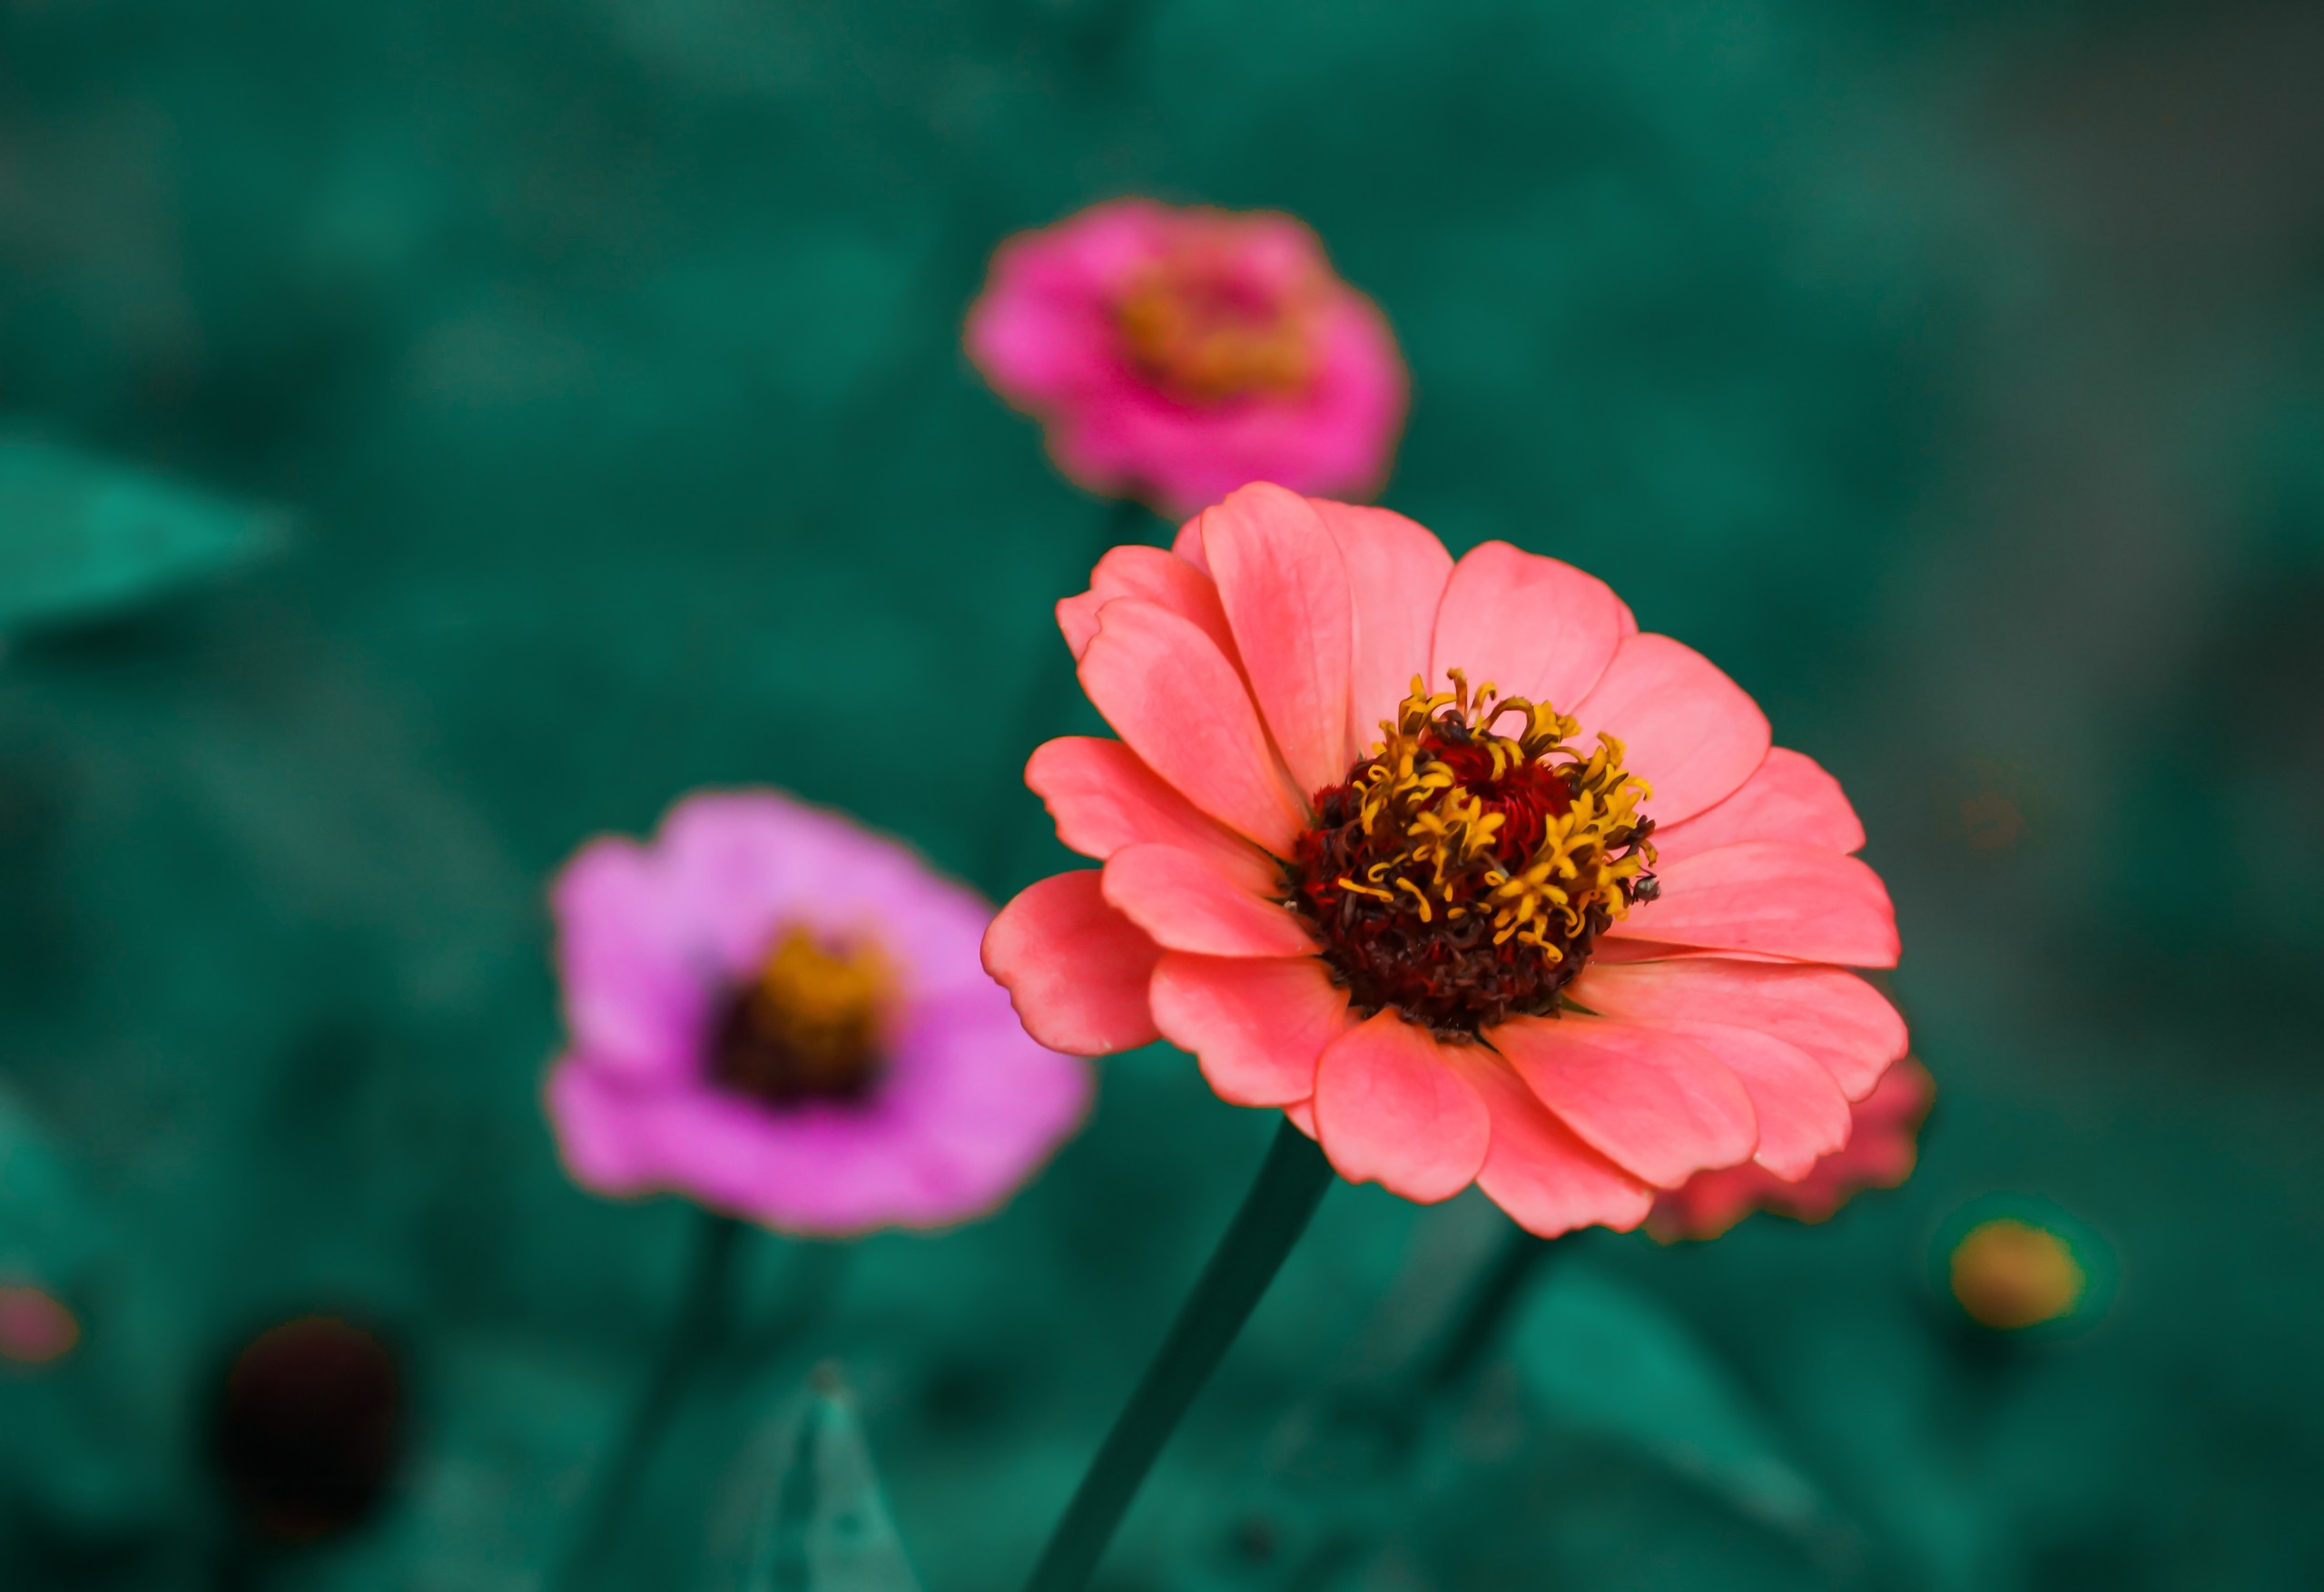 Pink Flower and Greenery